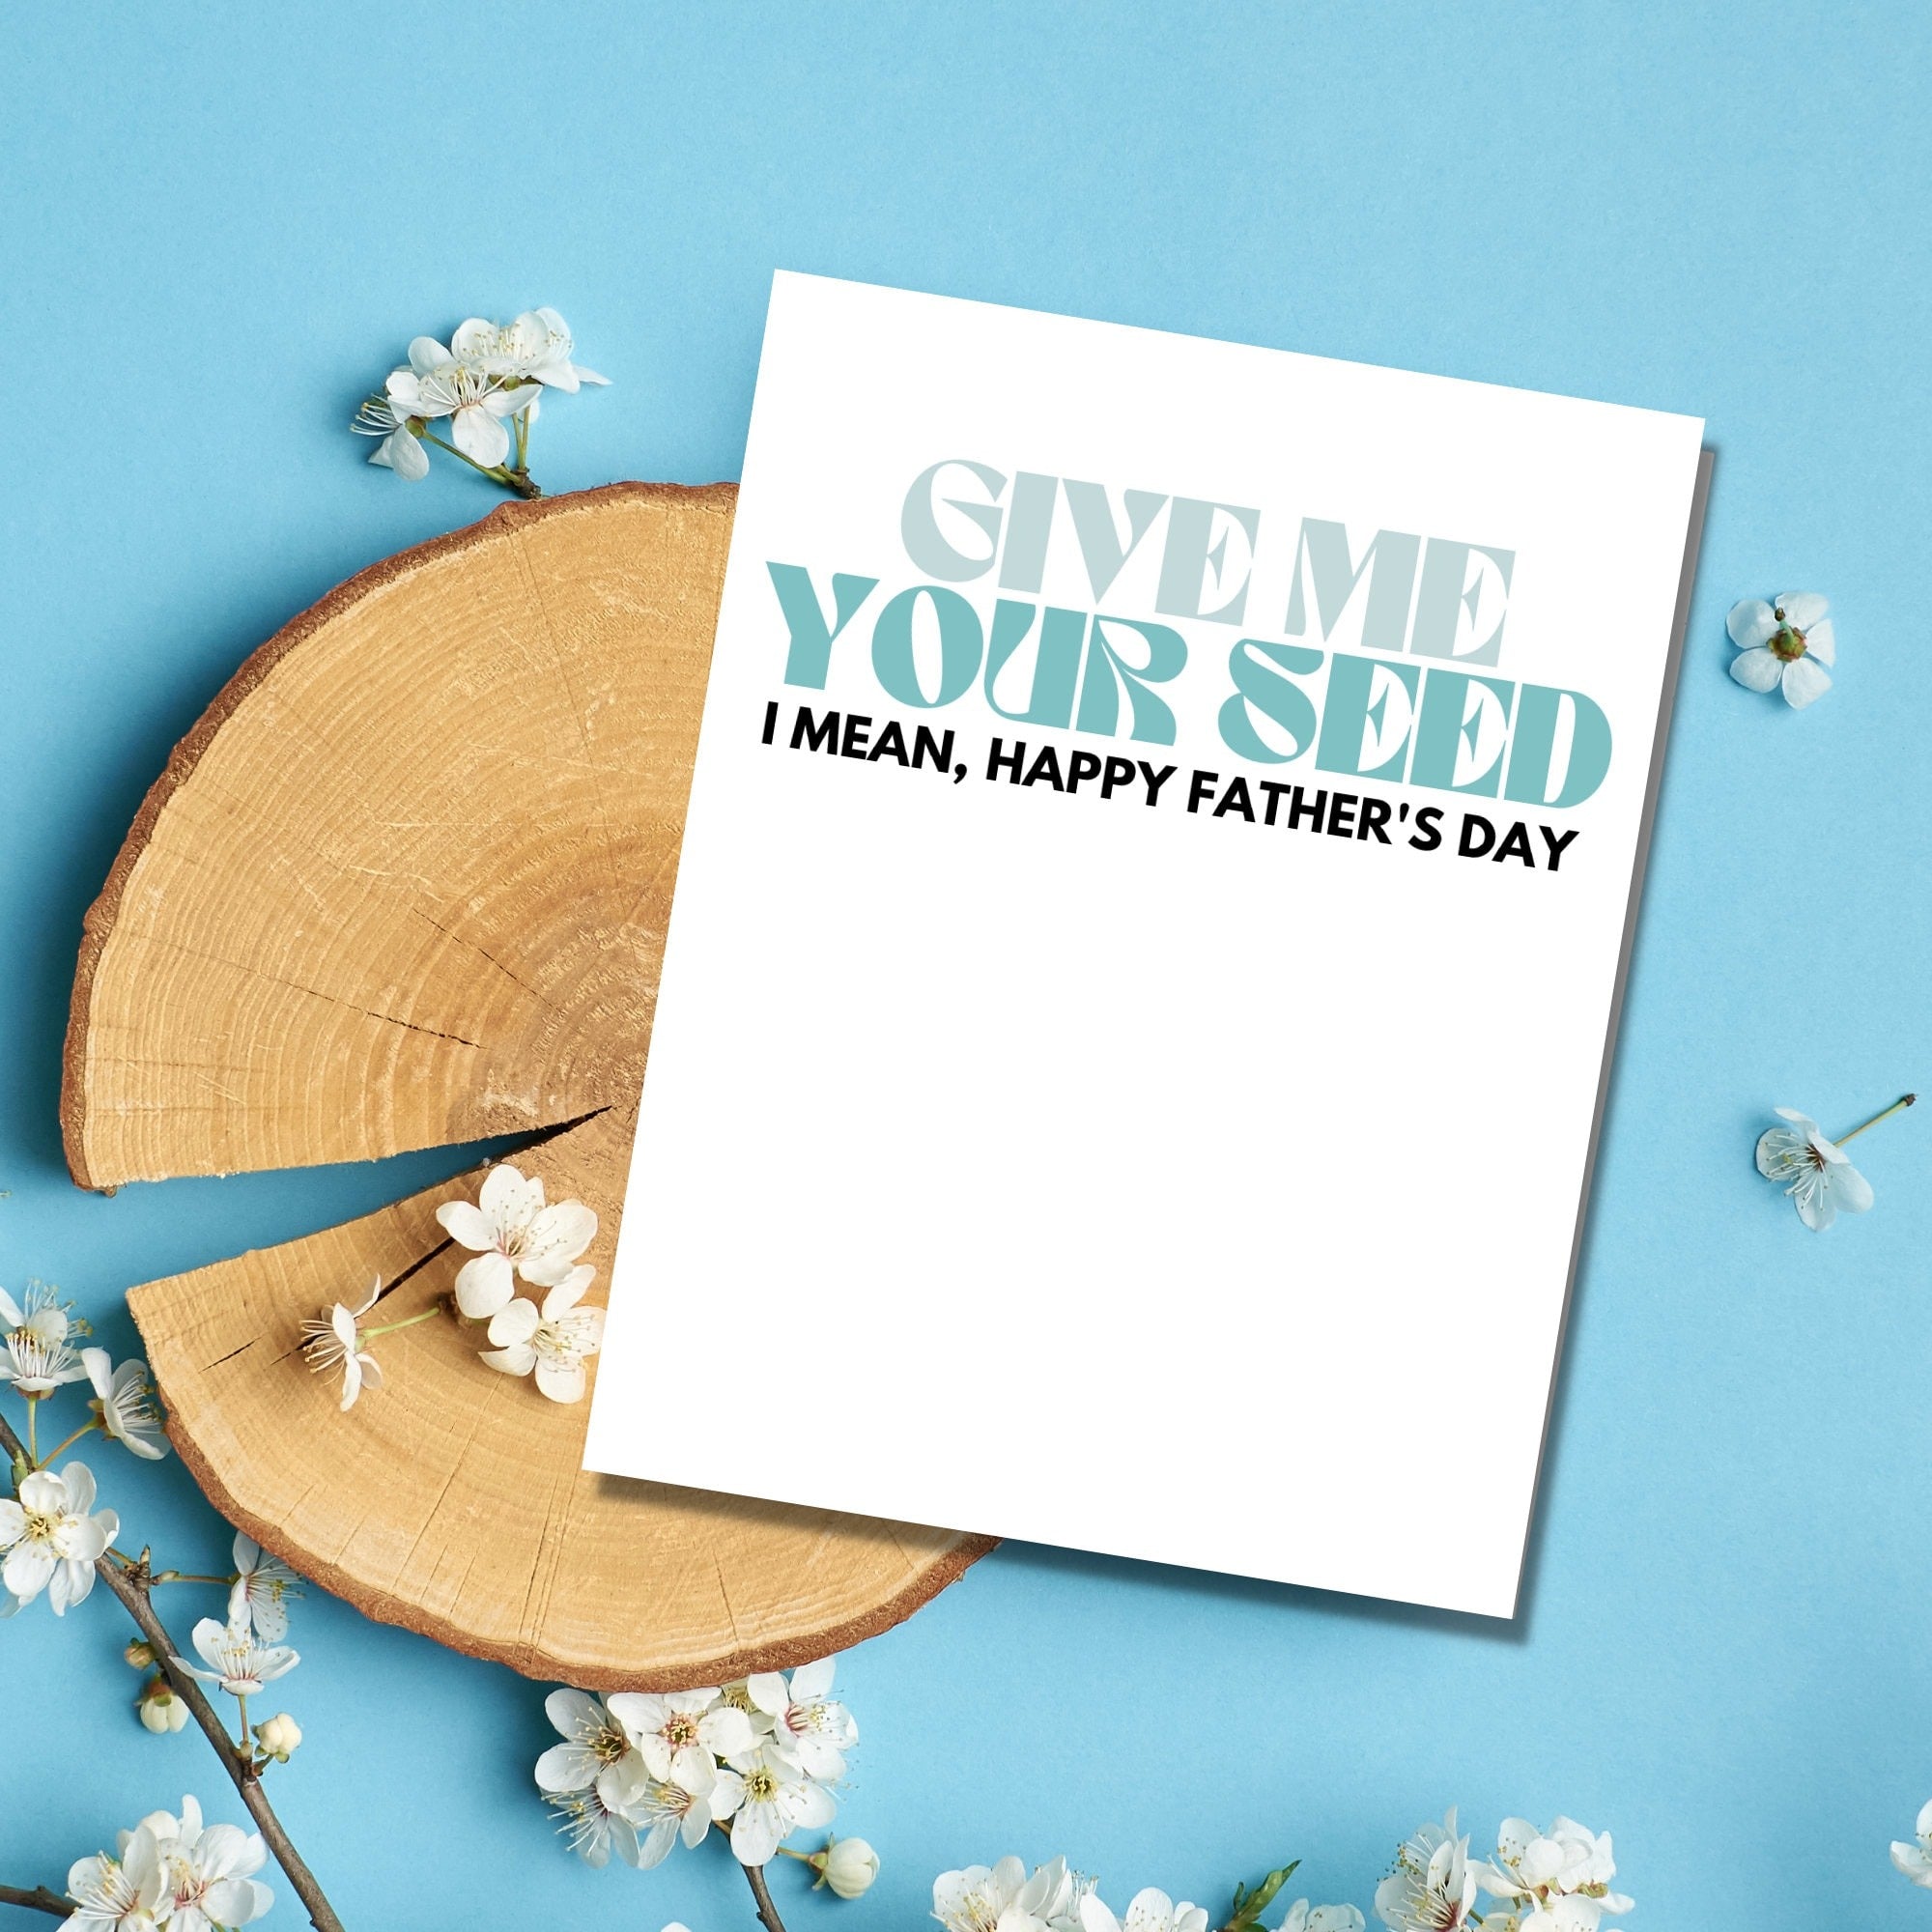 Give Me Your Seed I Mean, Happy Father's Day Card